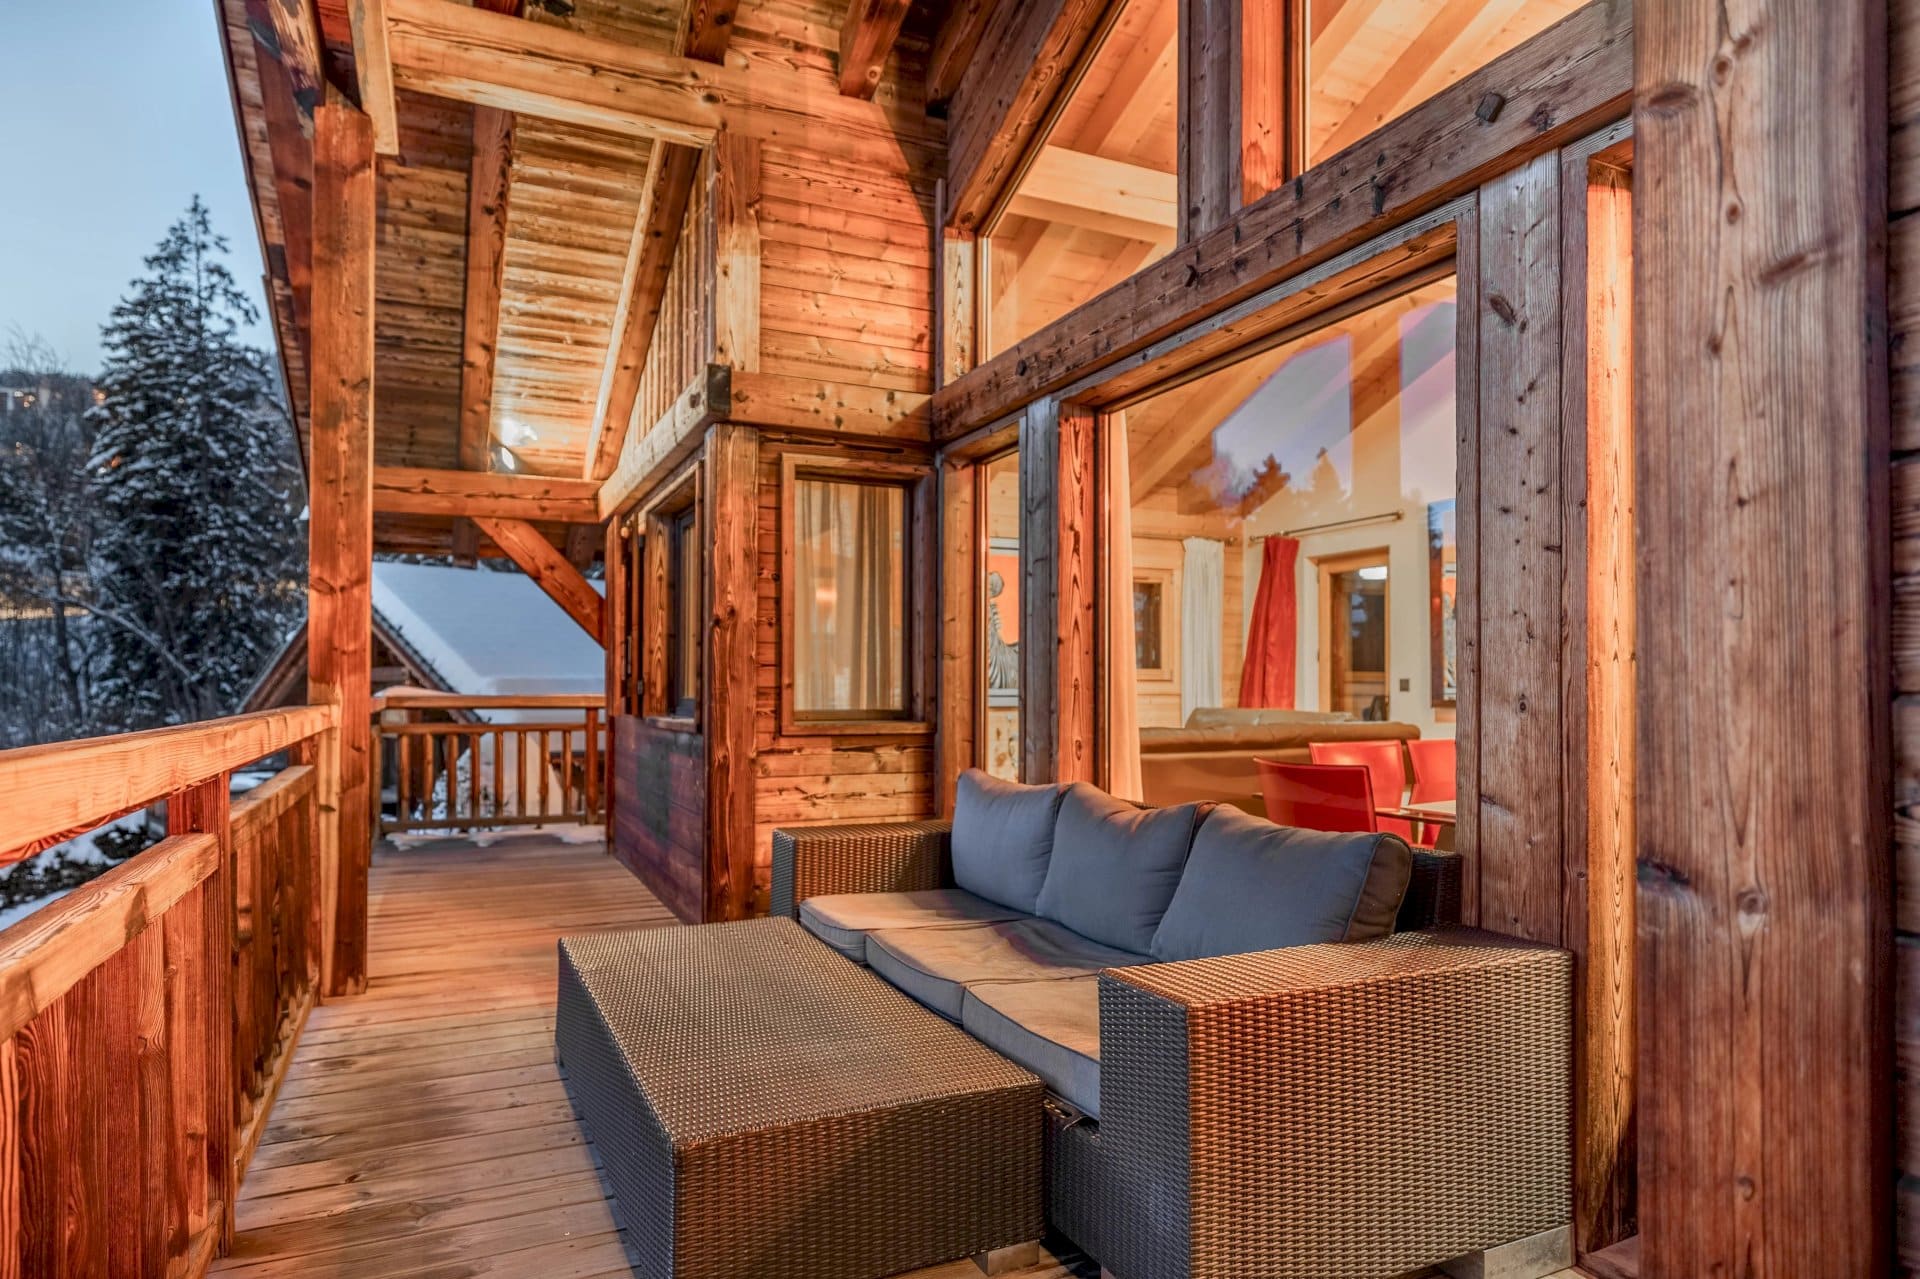 A sideways view of the bright wooden porch of a chalet, with a futon.